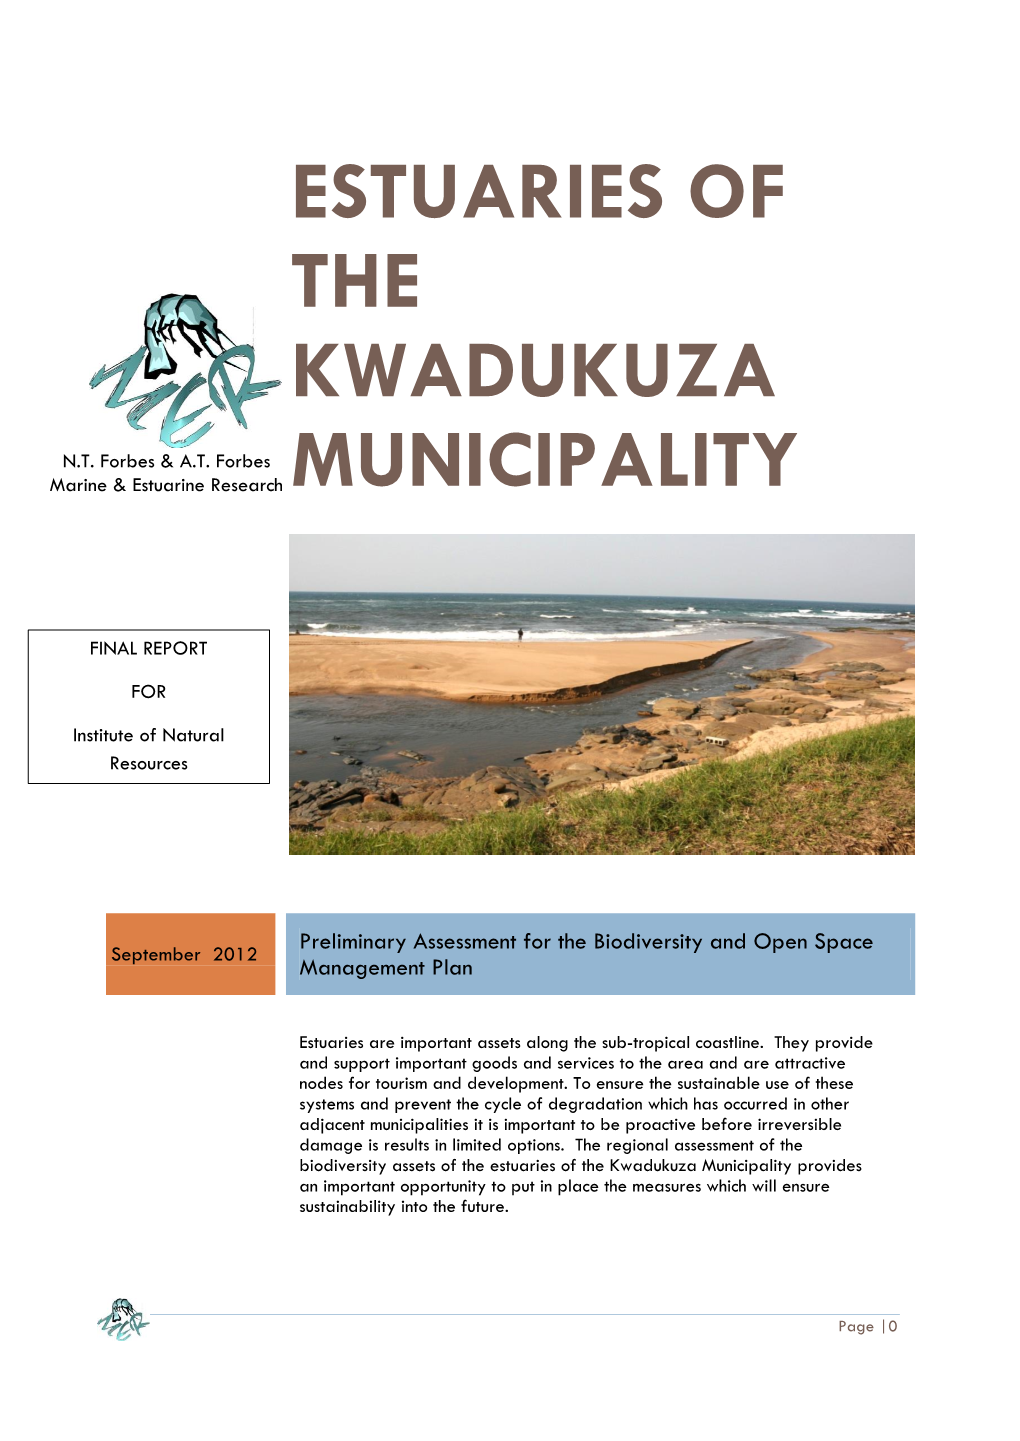 Estuaries of the Kwadukuza Municipality Provides an Important Opportunity to Put in Place the Measures Which Will Ensure Sustainability Into the Future